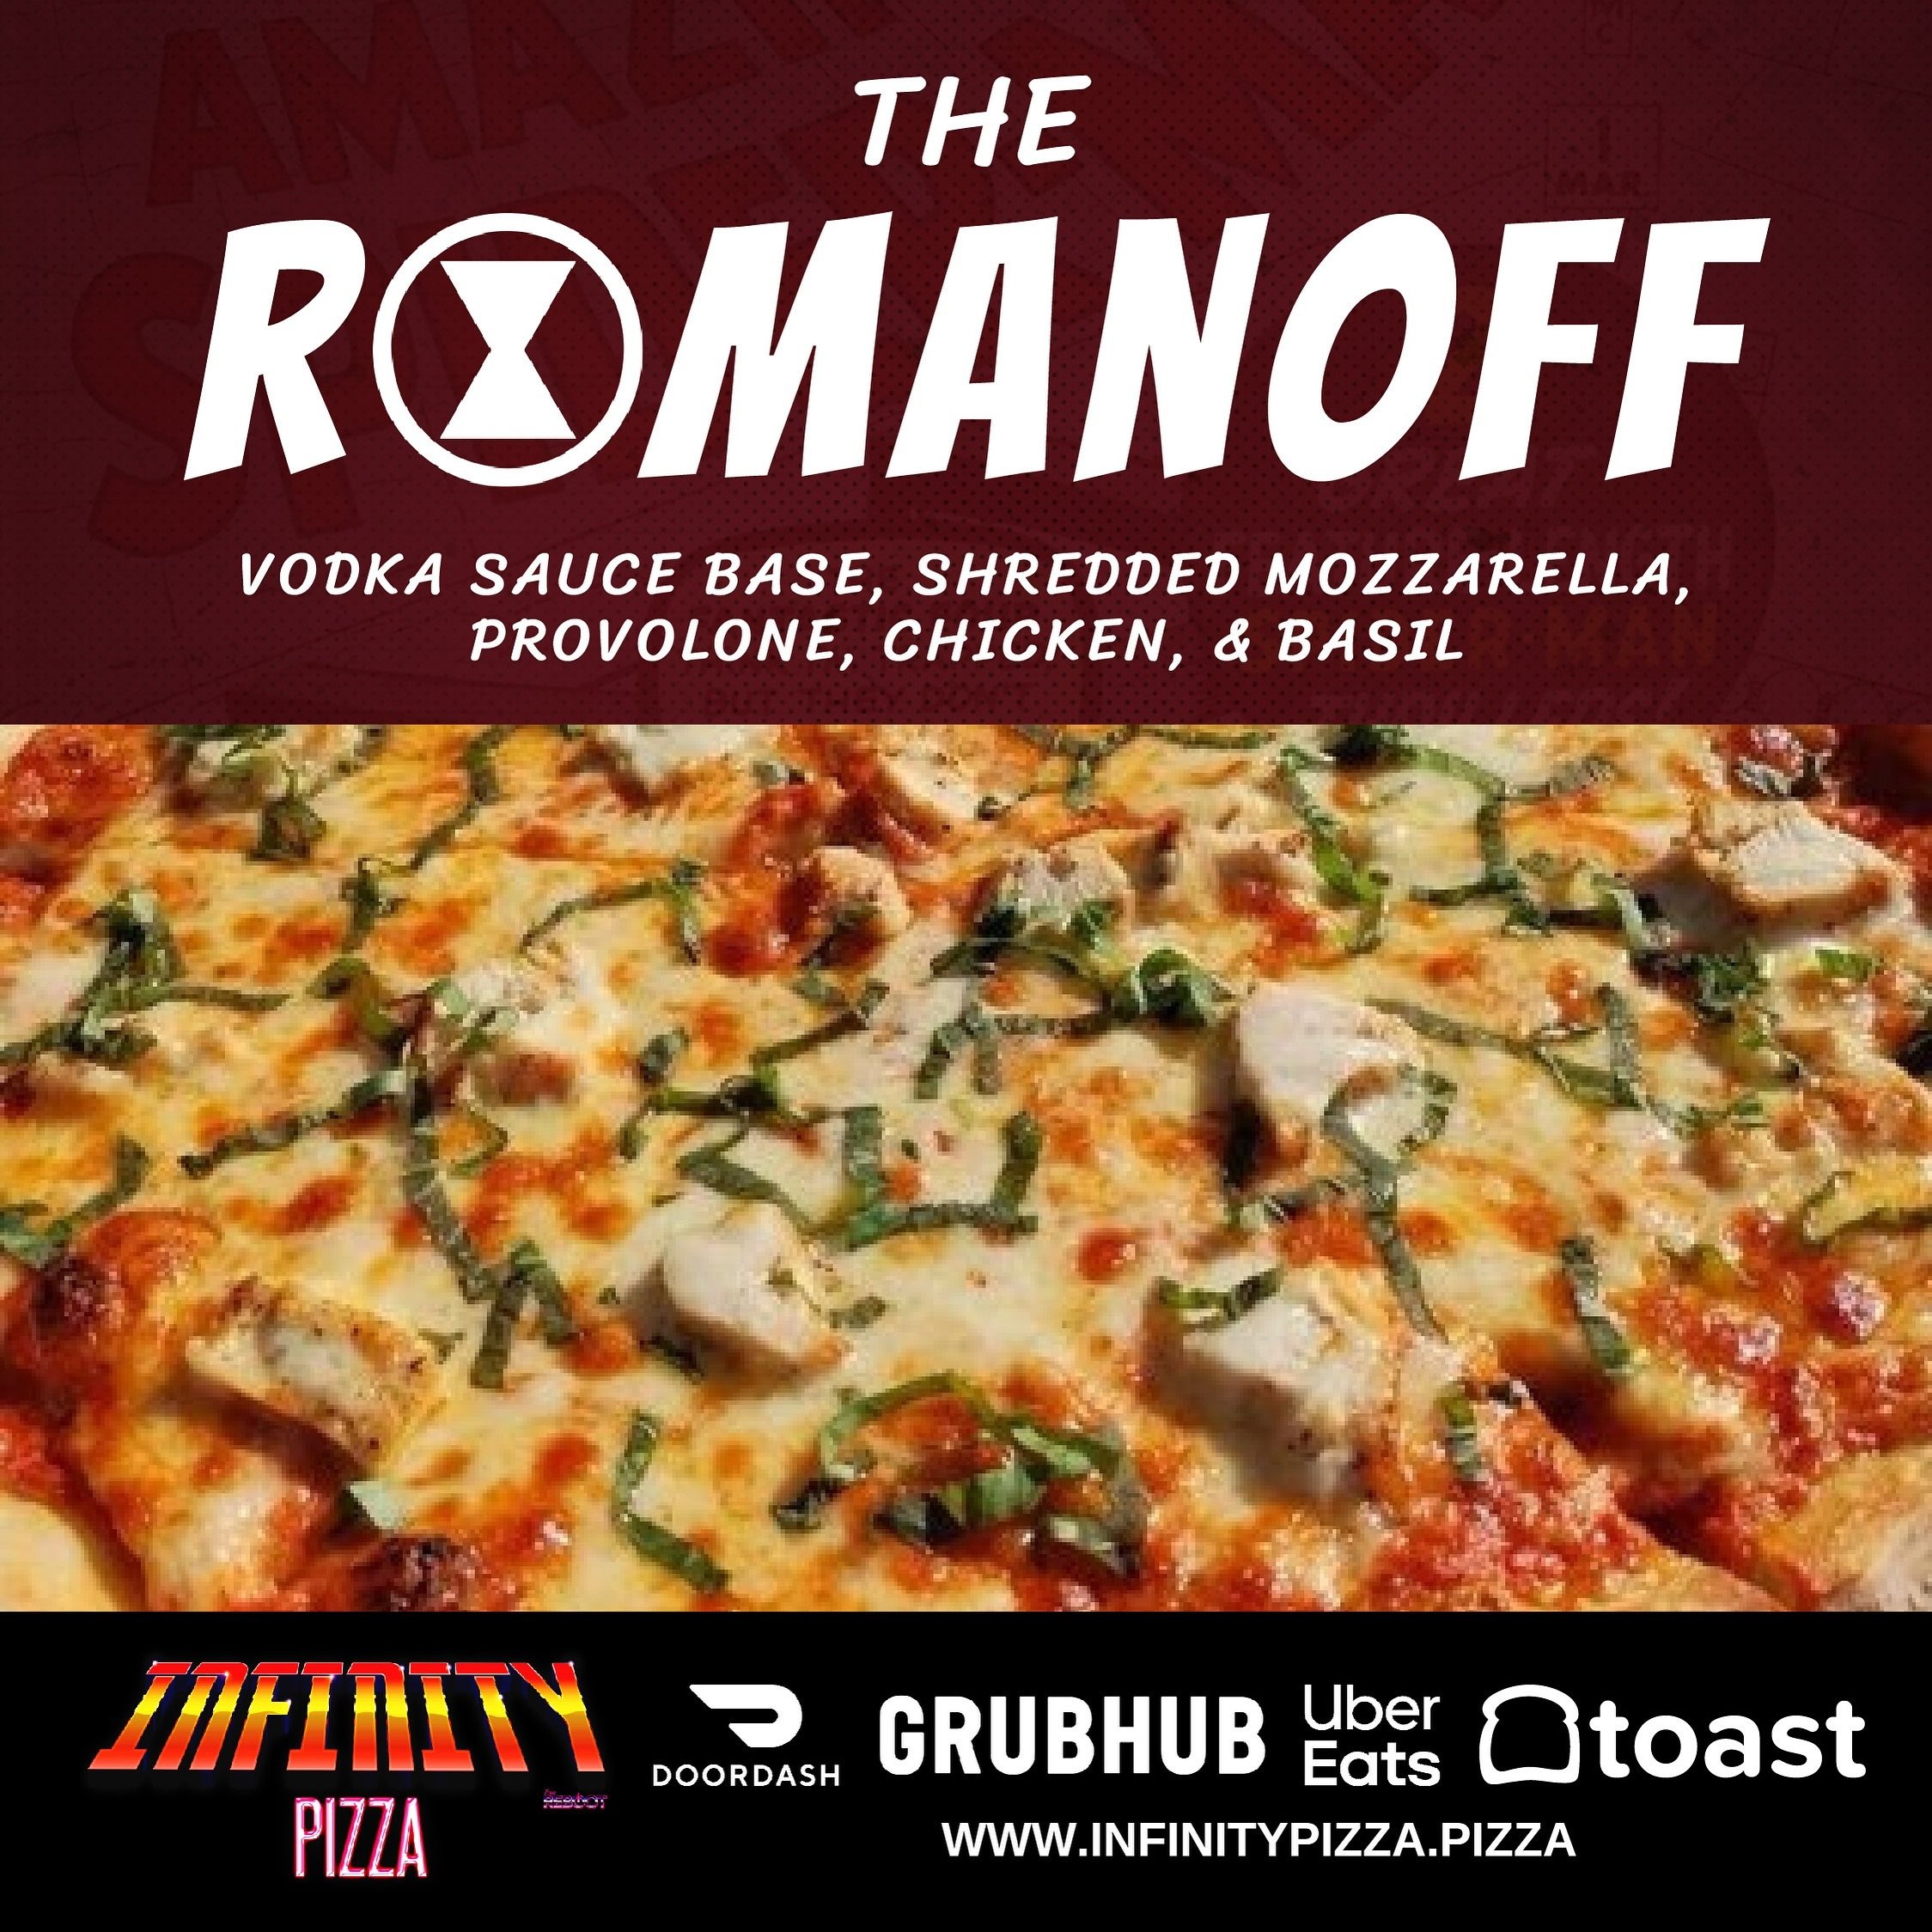 Introducing &ldquo;The Romanoff&rdquo; our pizza chefs have put together this pie with vodka sauce base, shredded mozzarella, provolone, chicken, basil 🤤 
You want it, we have it: order on any of our delivery apps (@toasttab is our fave!) 🍕